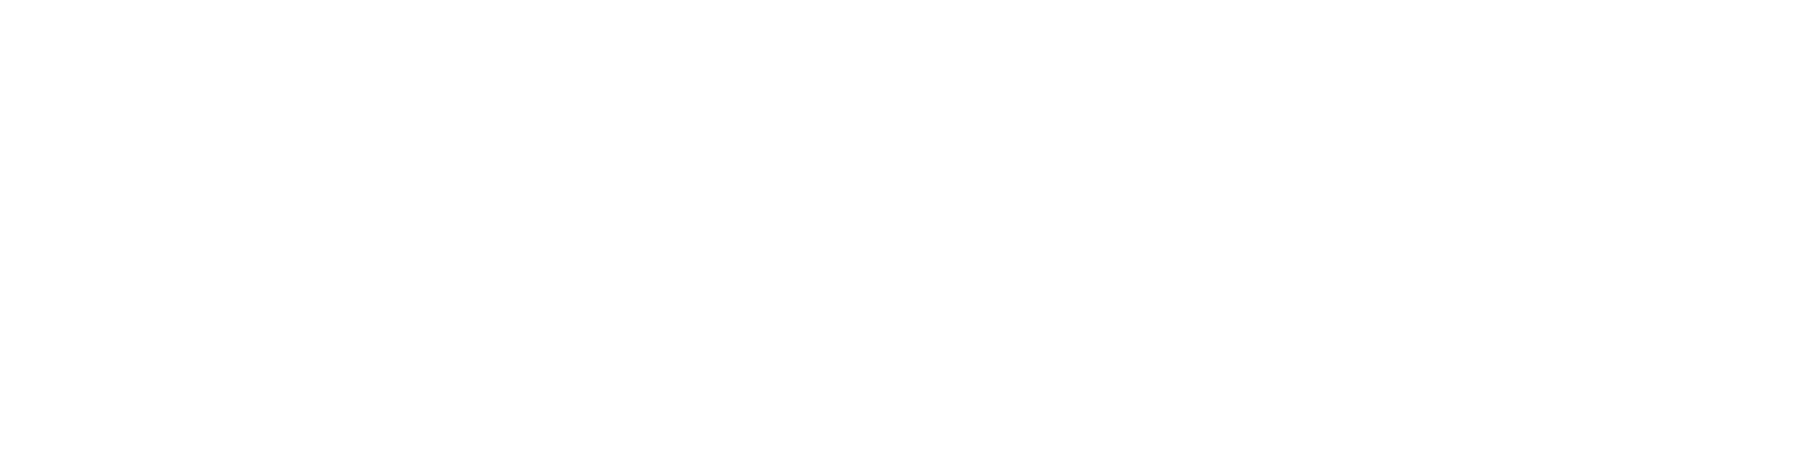 Lawrence Funeral Home Logo